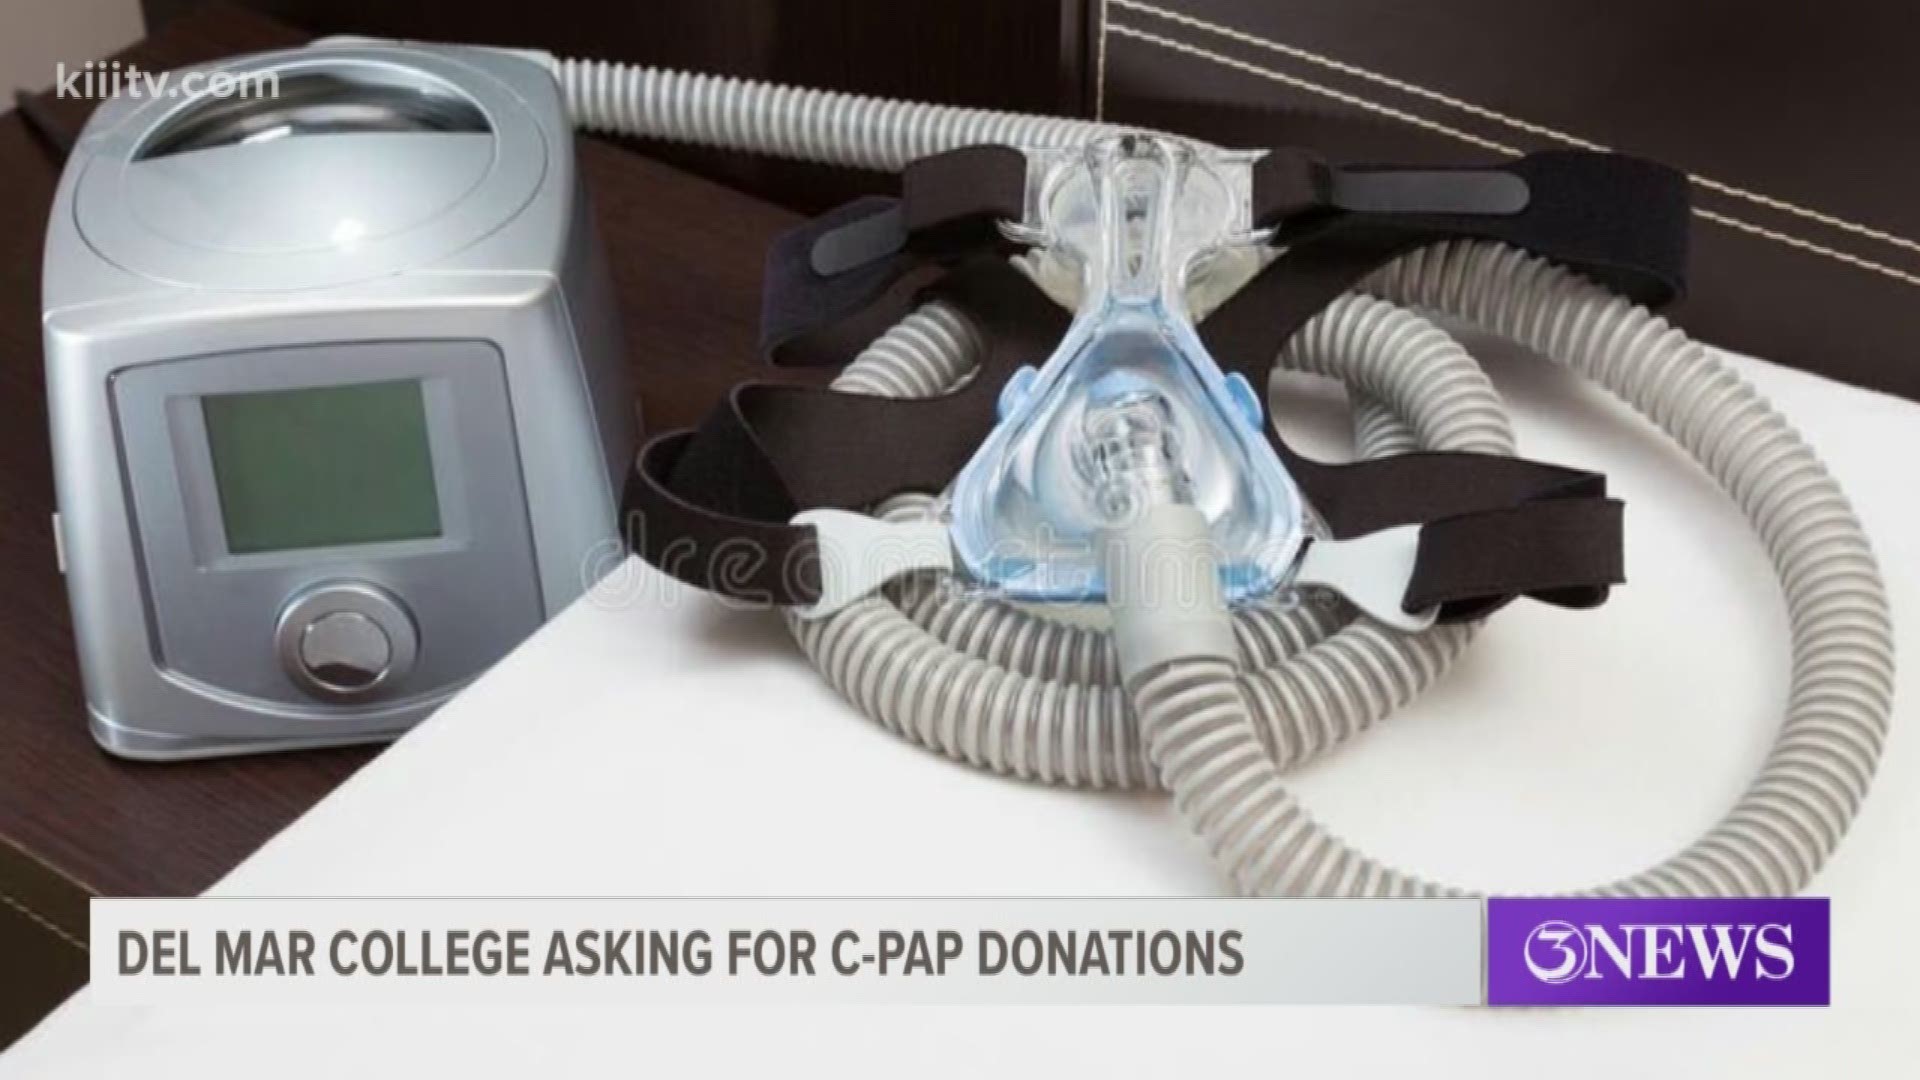 Nueces County Health District and Del Mar College are asking residents to donate CPAP and BiPAP machines.